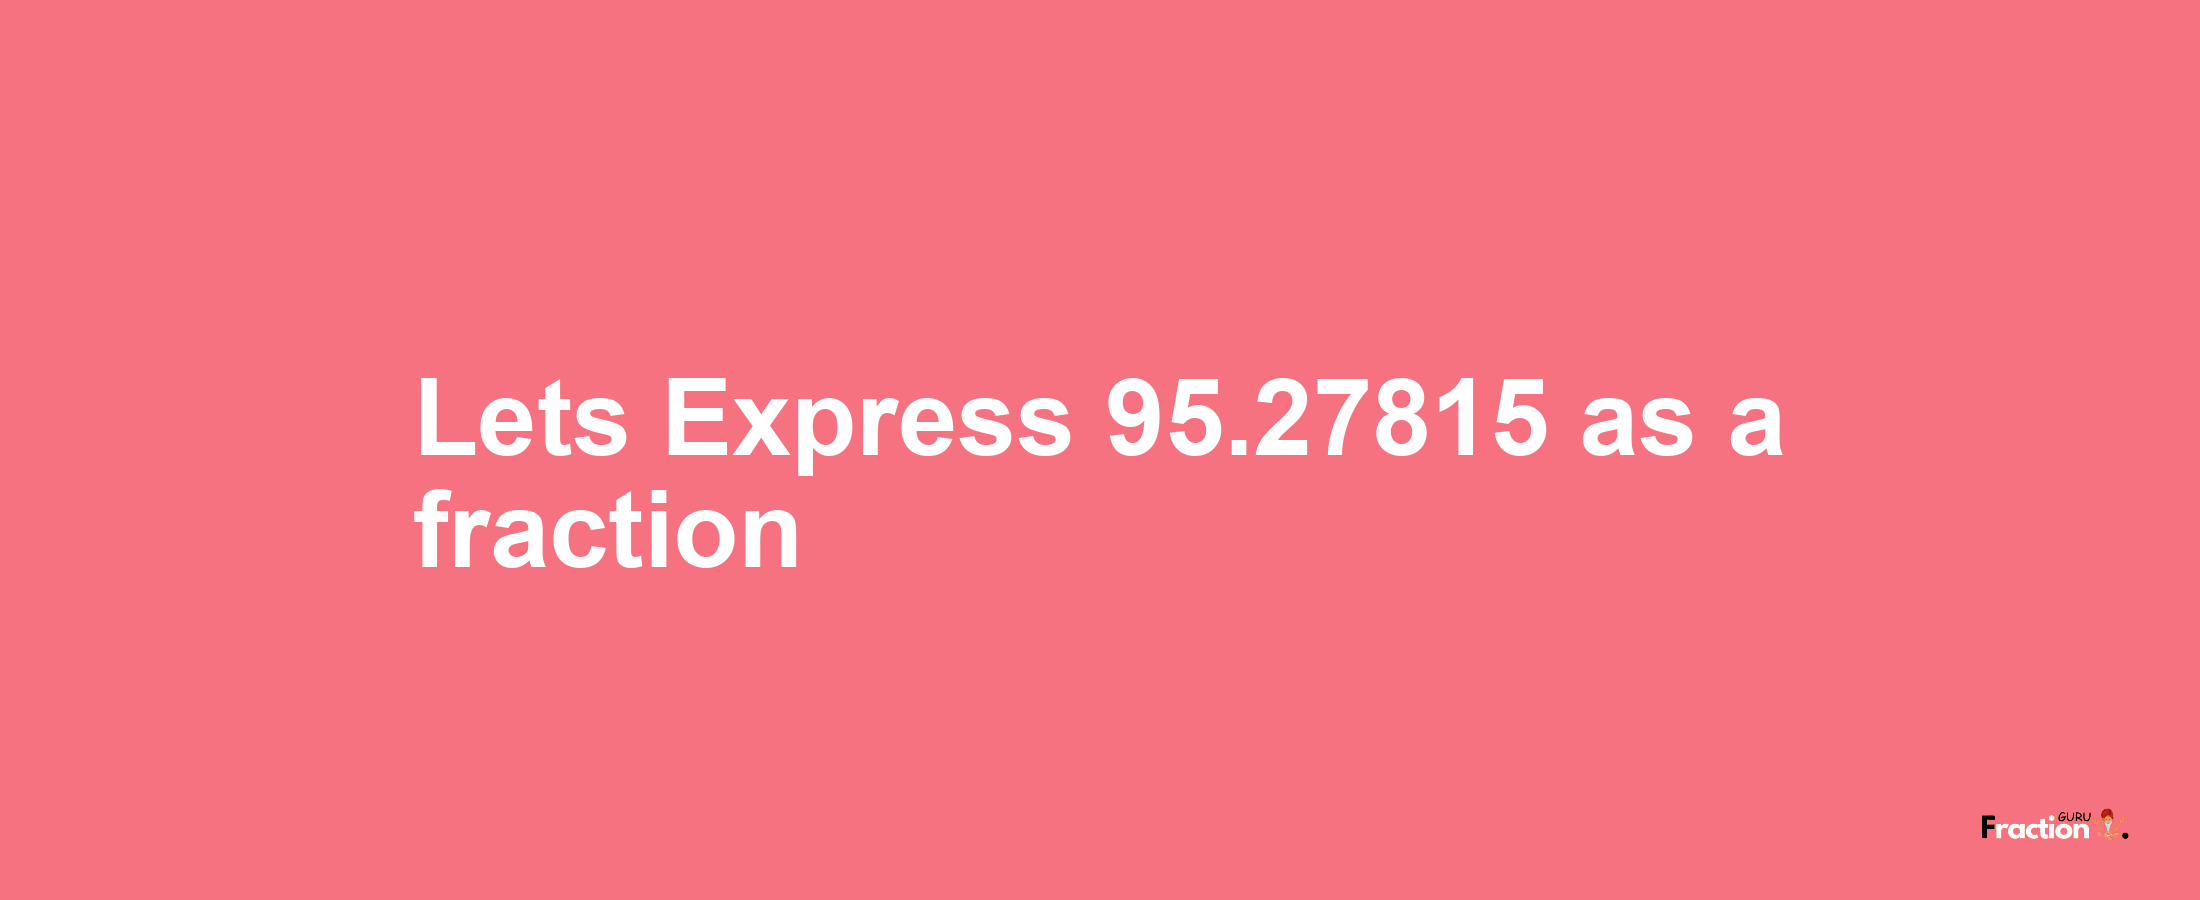 Lets Express 95.27815 as afraction